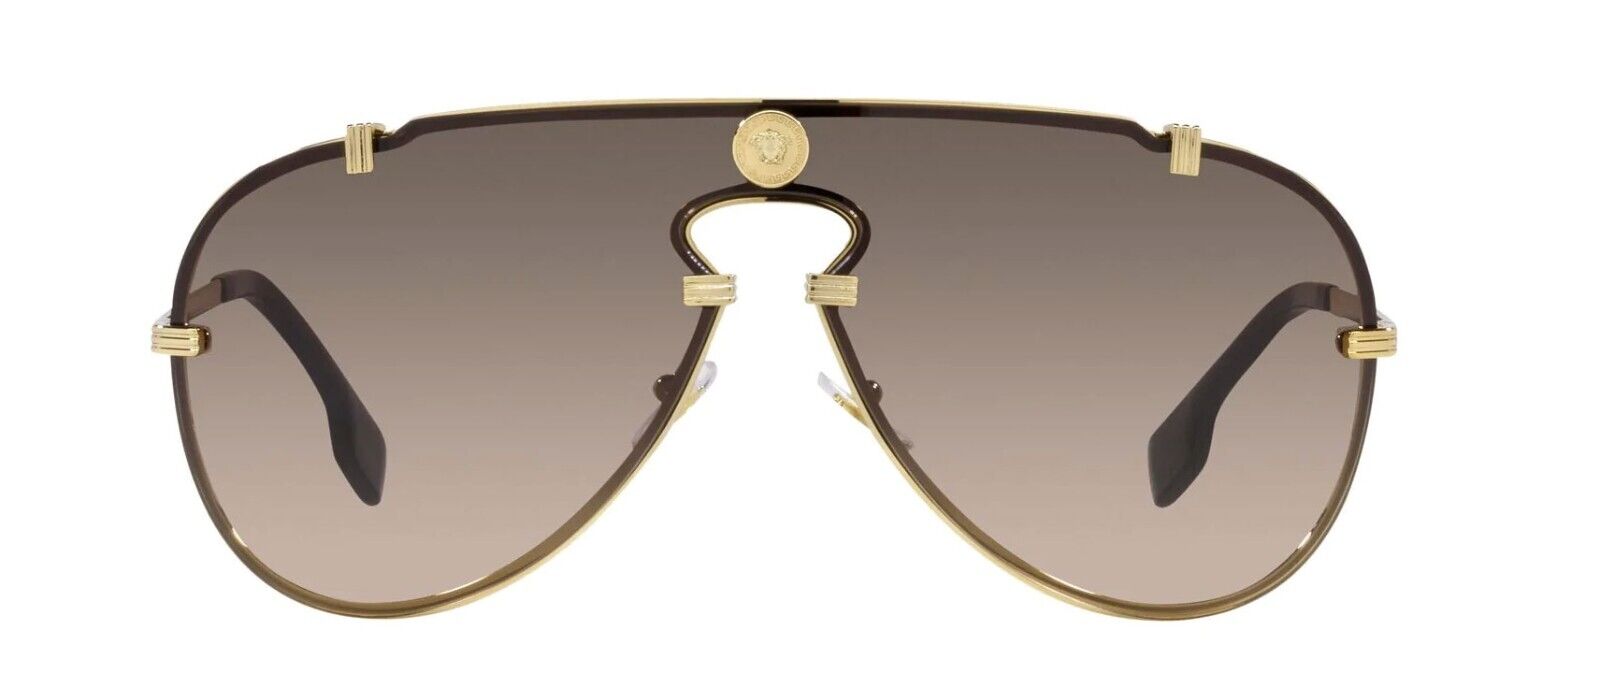 Versace Sunglasses VE 2243 1002/13 43-xx-140 Gold / Brown Gradient Made in Italy-8056597661553-classypw.com-2